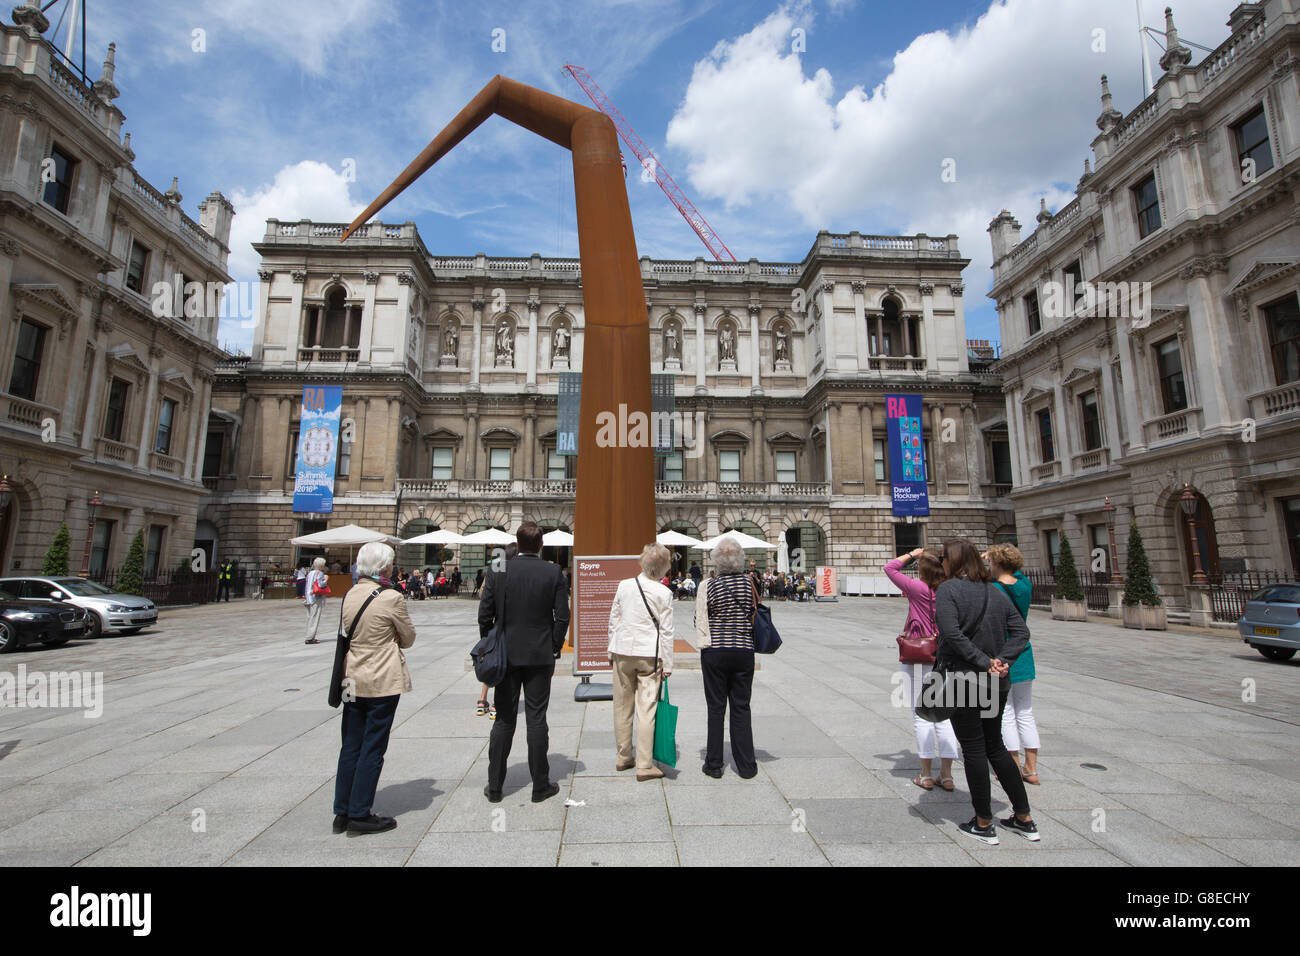 People viewing 'SPYRE' by artist Ron Arad exhibited in the Royal Academy of Arts courtyard, Piccadilly, London, England, UK Stock Photo